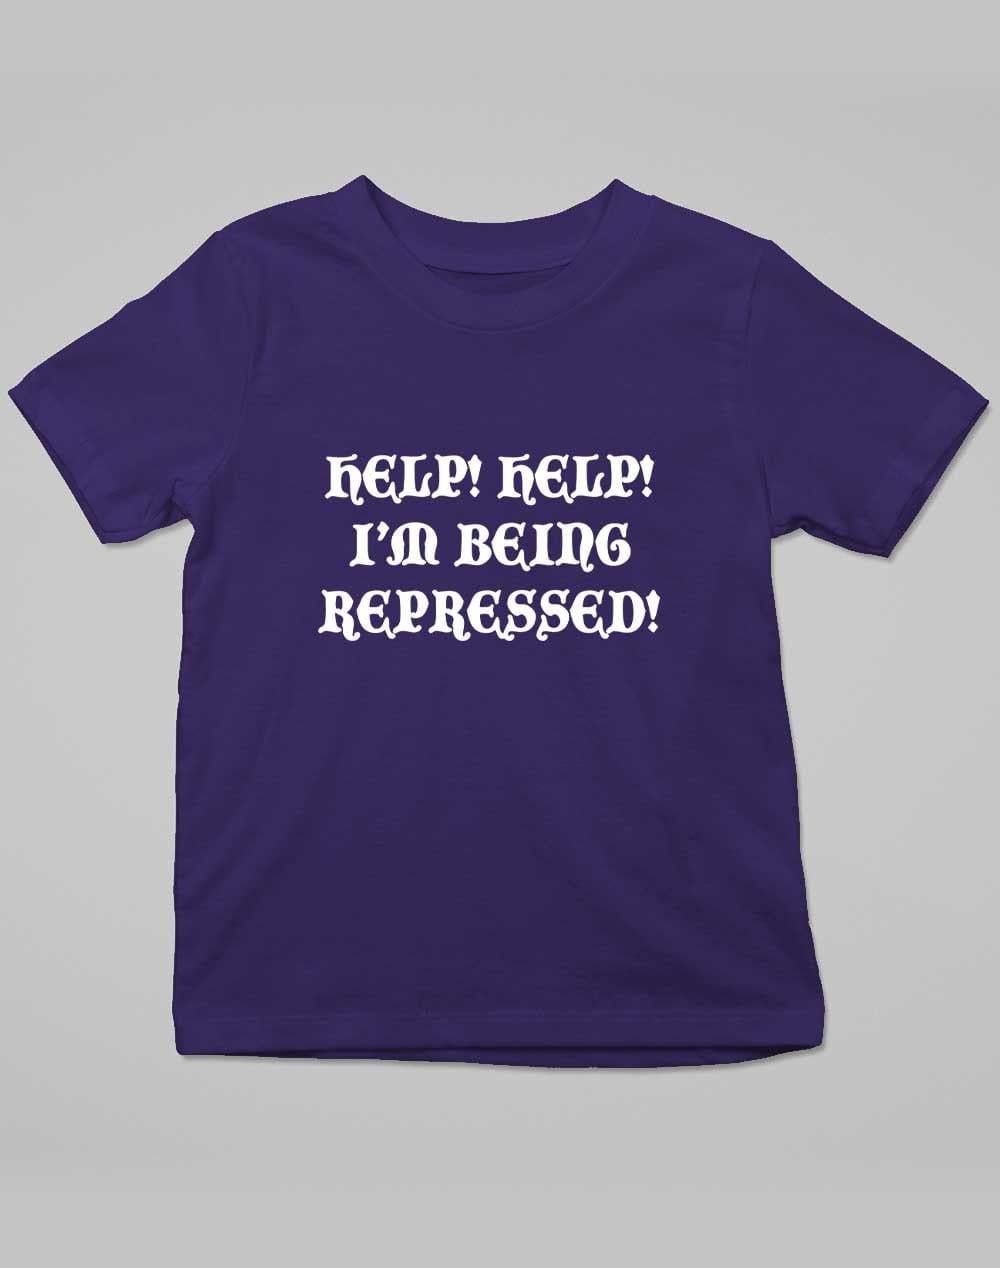 Help I'm Being Repressed Kids T-Shirt 3-4 years / Navy  - Off World Tees